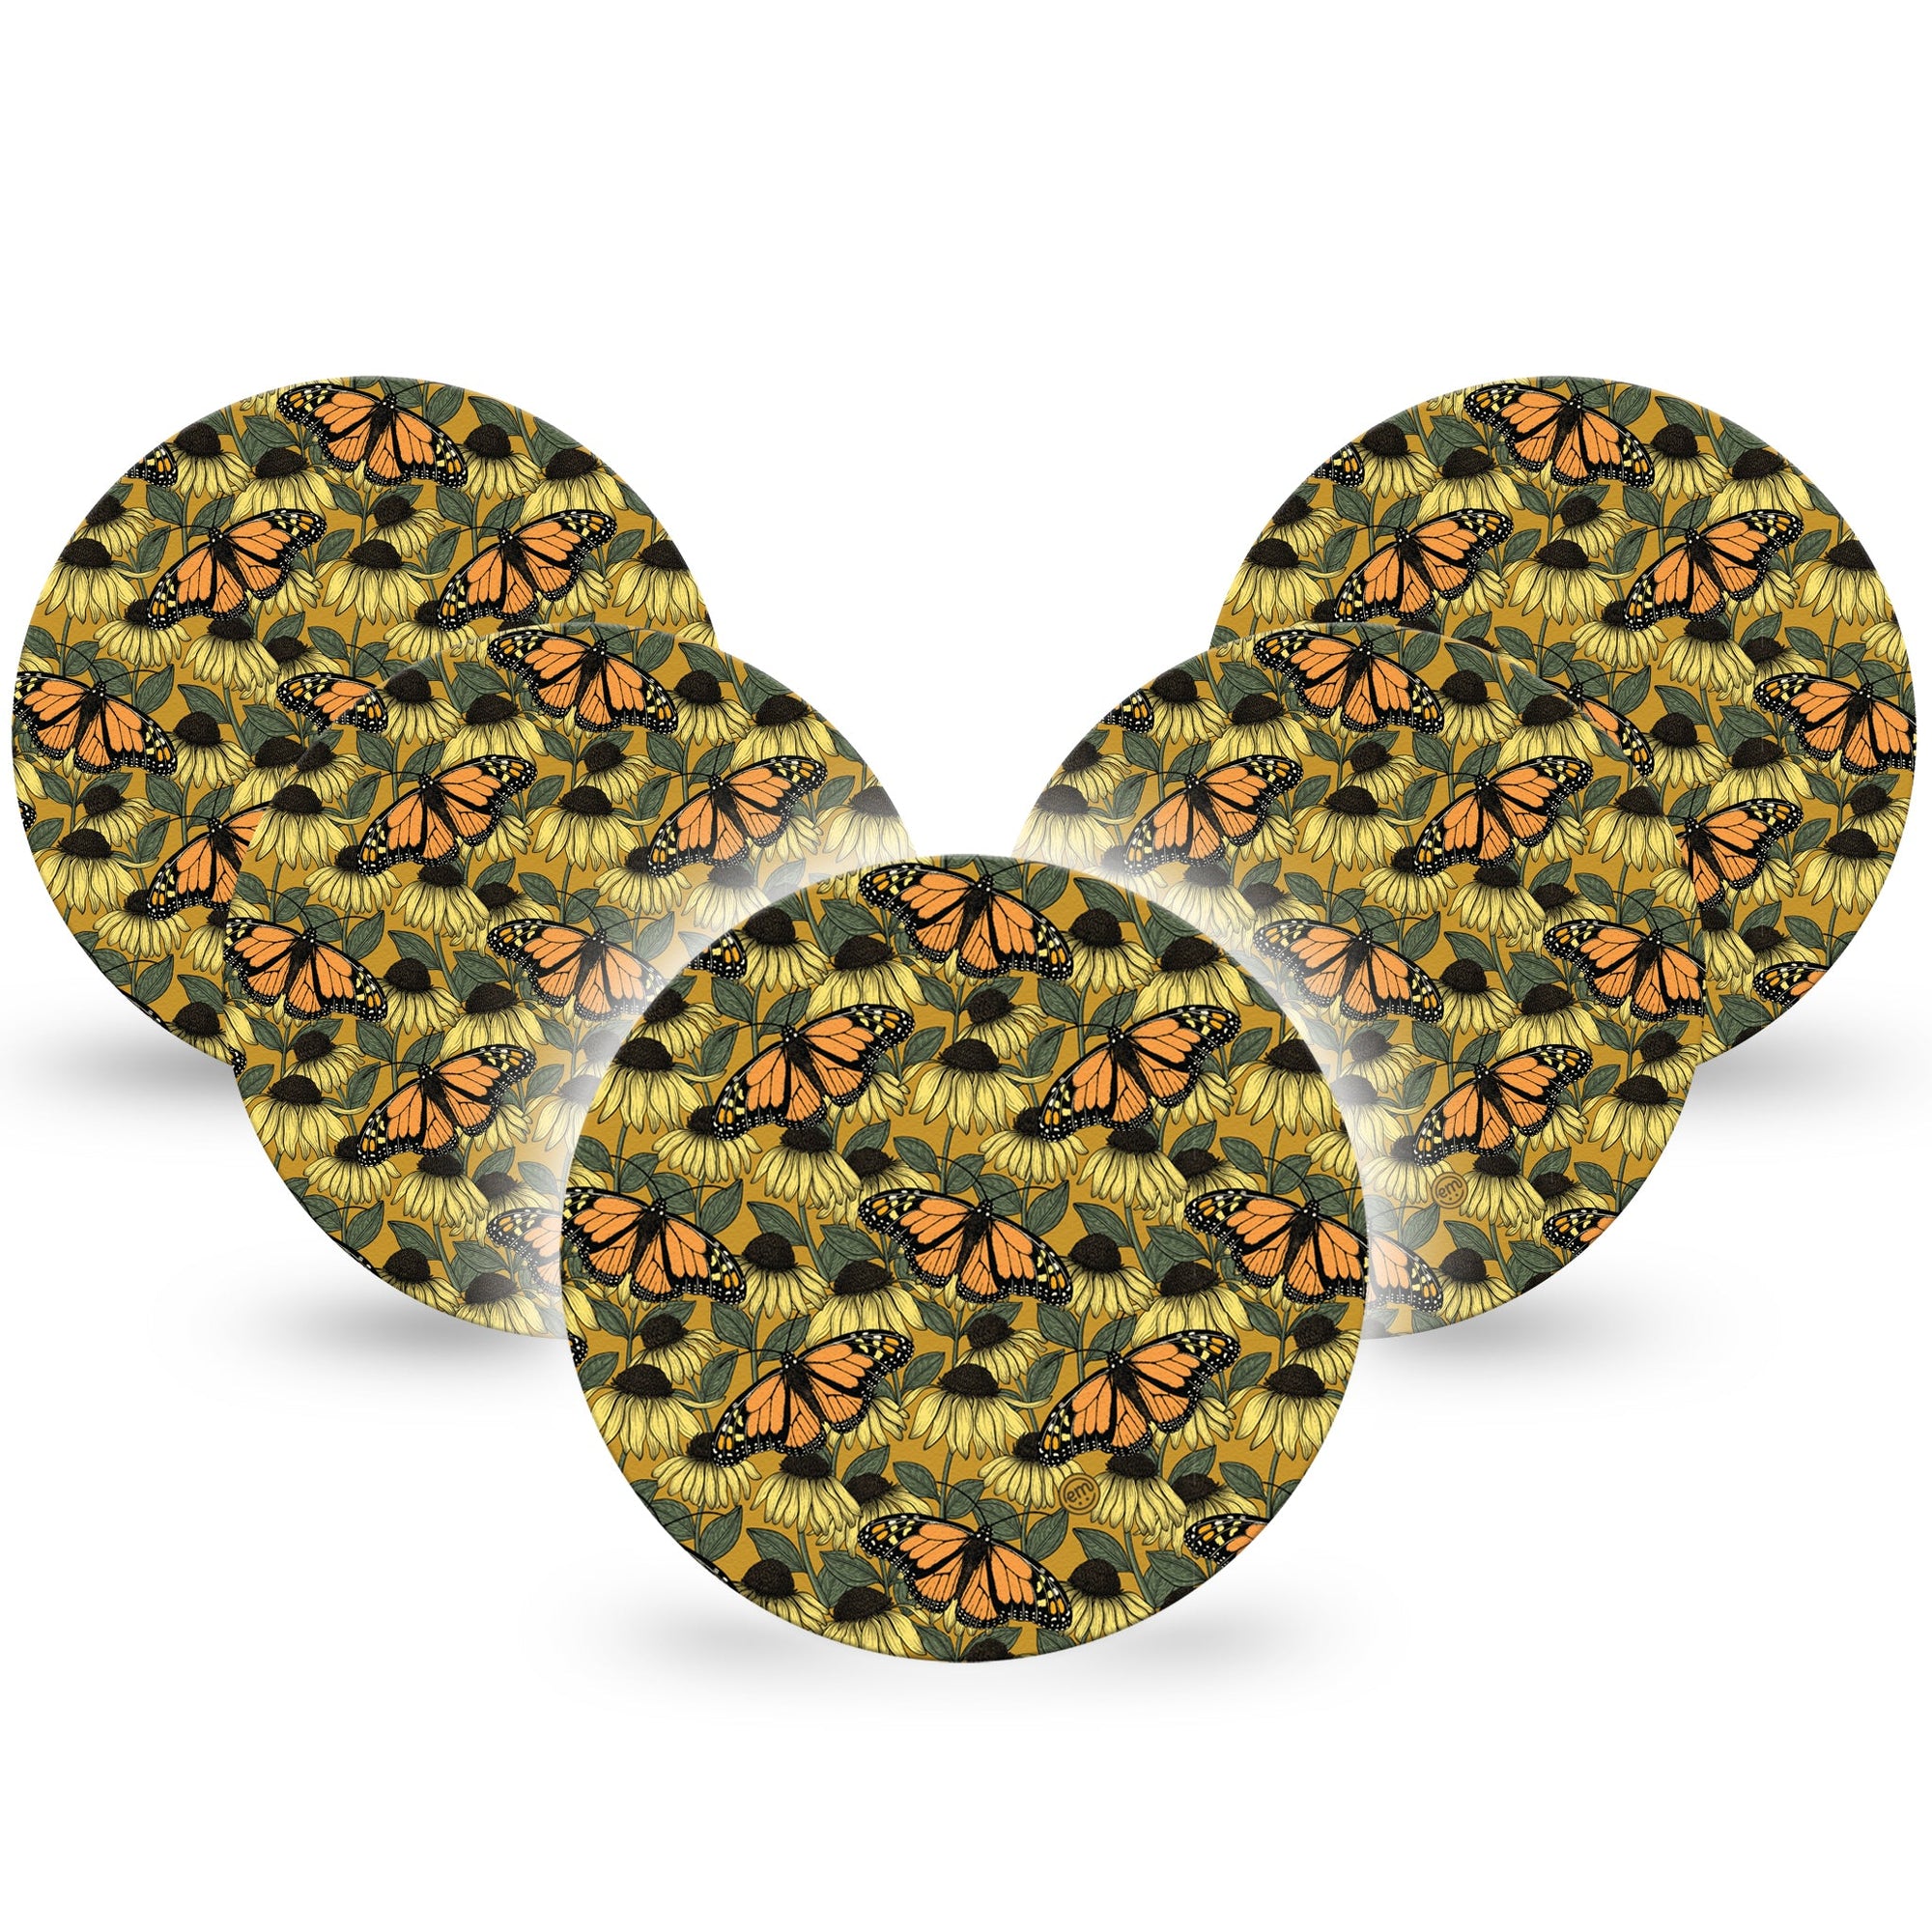 ExpressionMed Coneflowers & Monarchs Libre 2 Overpatch Tape 5-Pack Pollinating Flowers And Butterflies, CGM Adhesive Patch Design